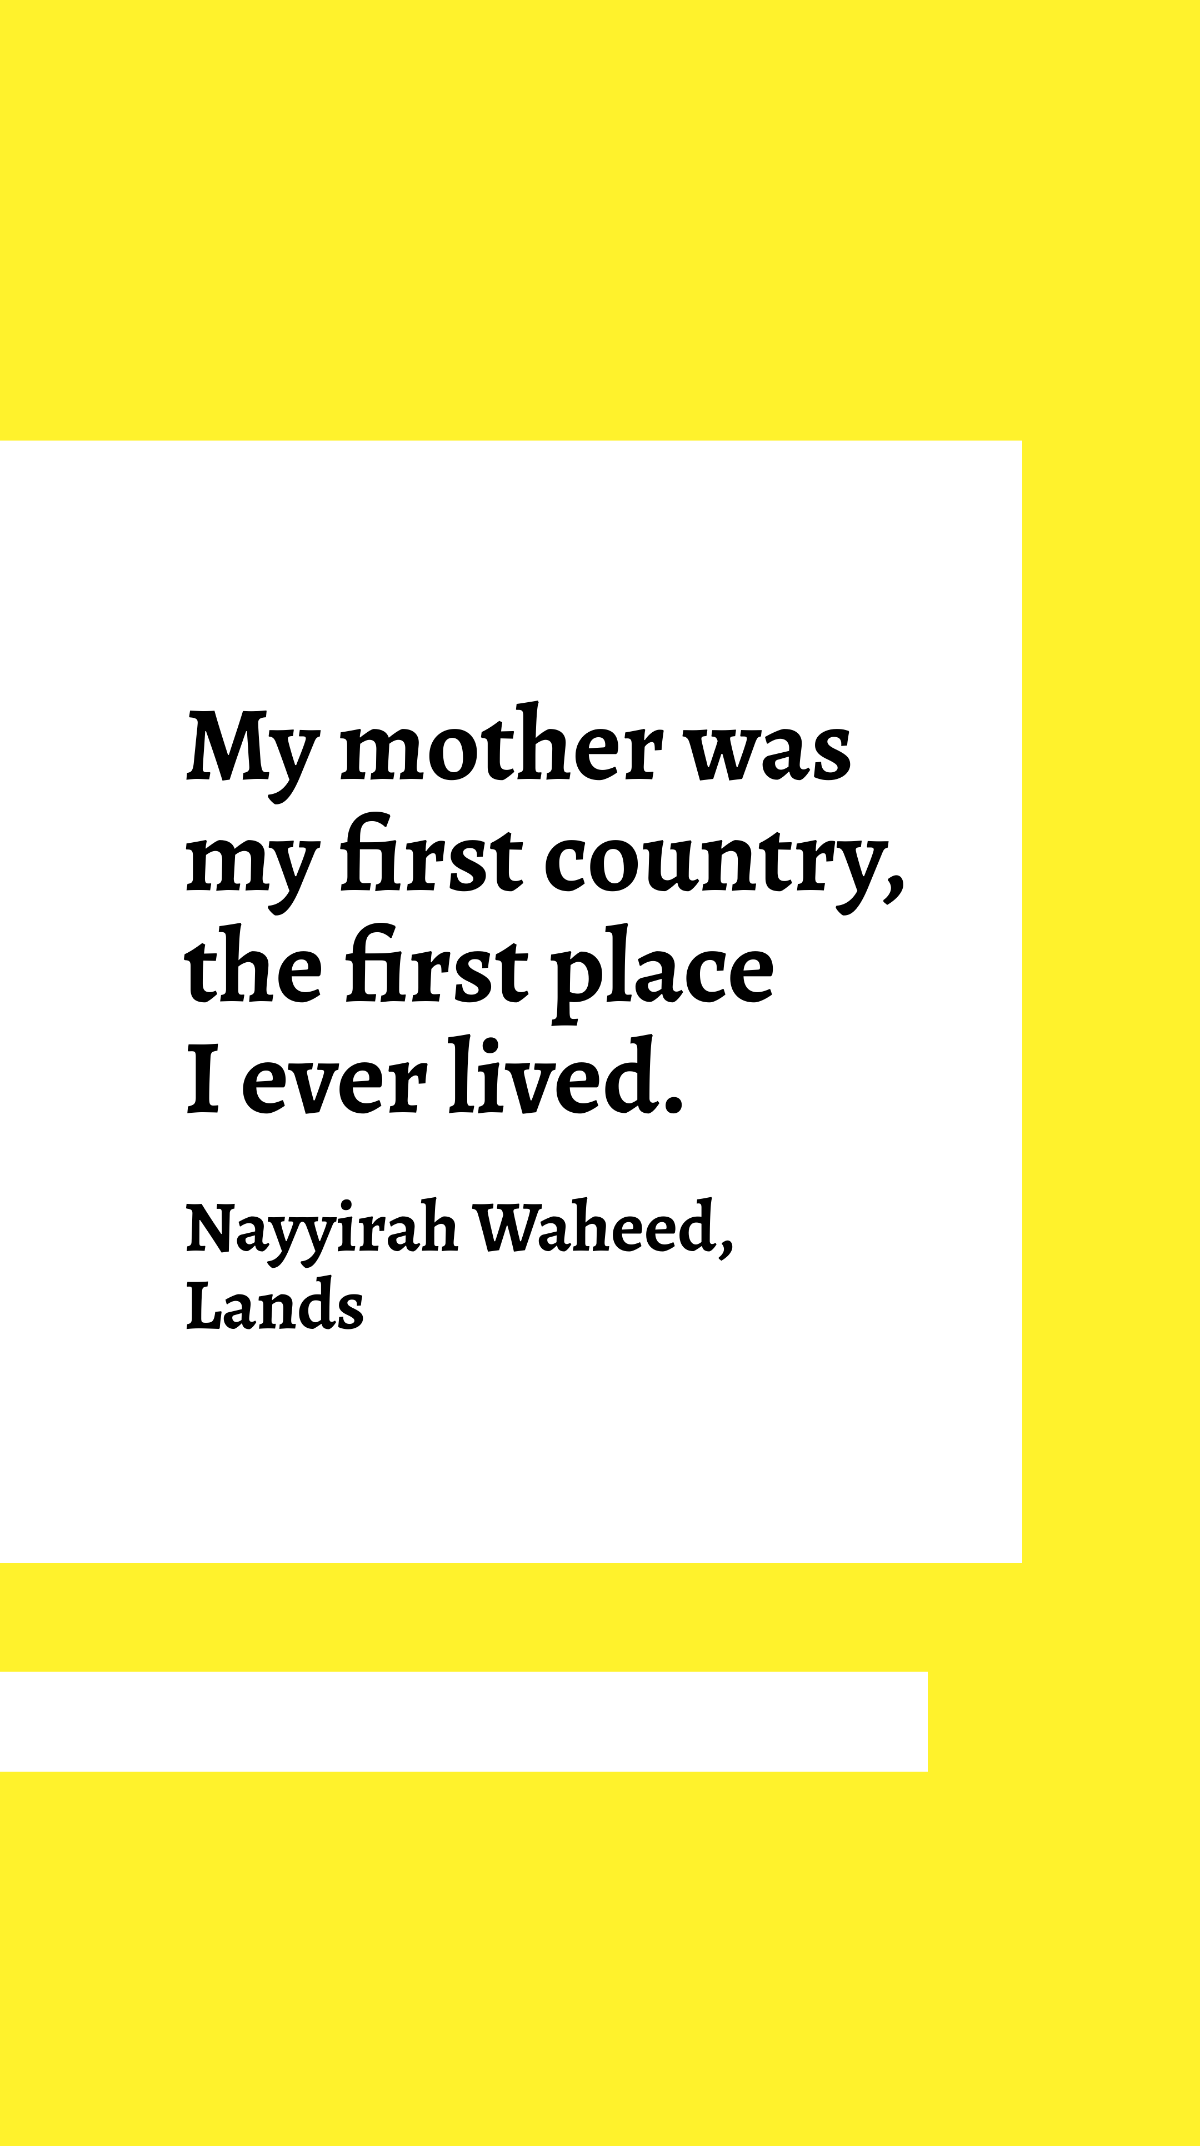 Nayyirah Waheed, Lands - My mother was my first country, the first ...